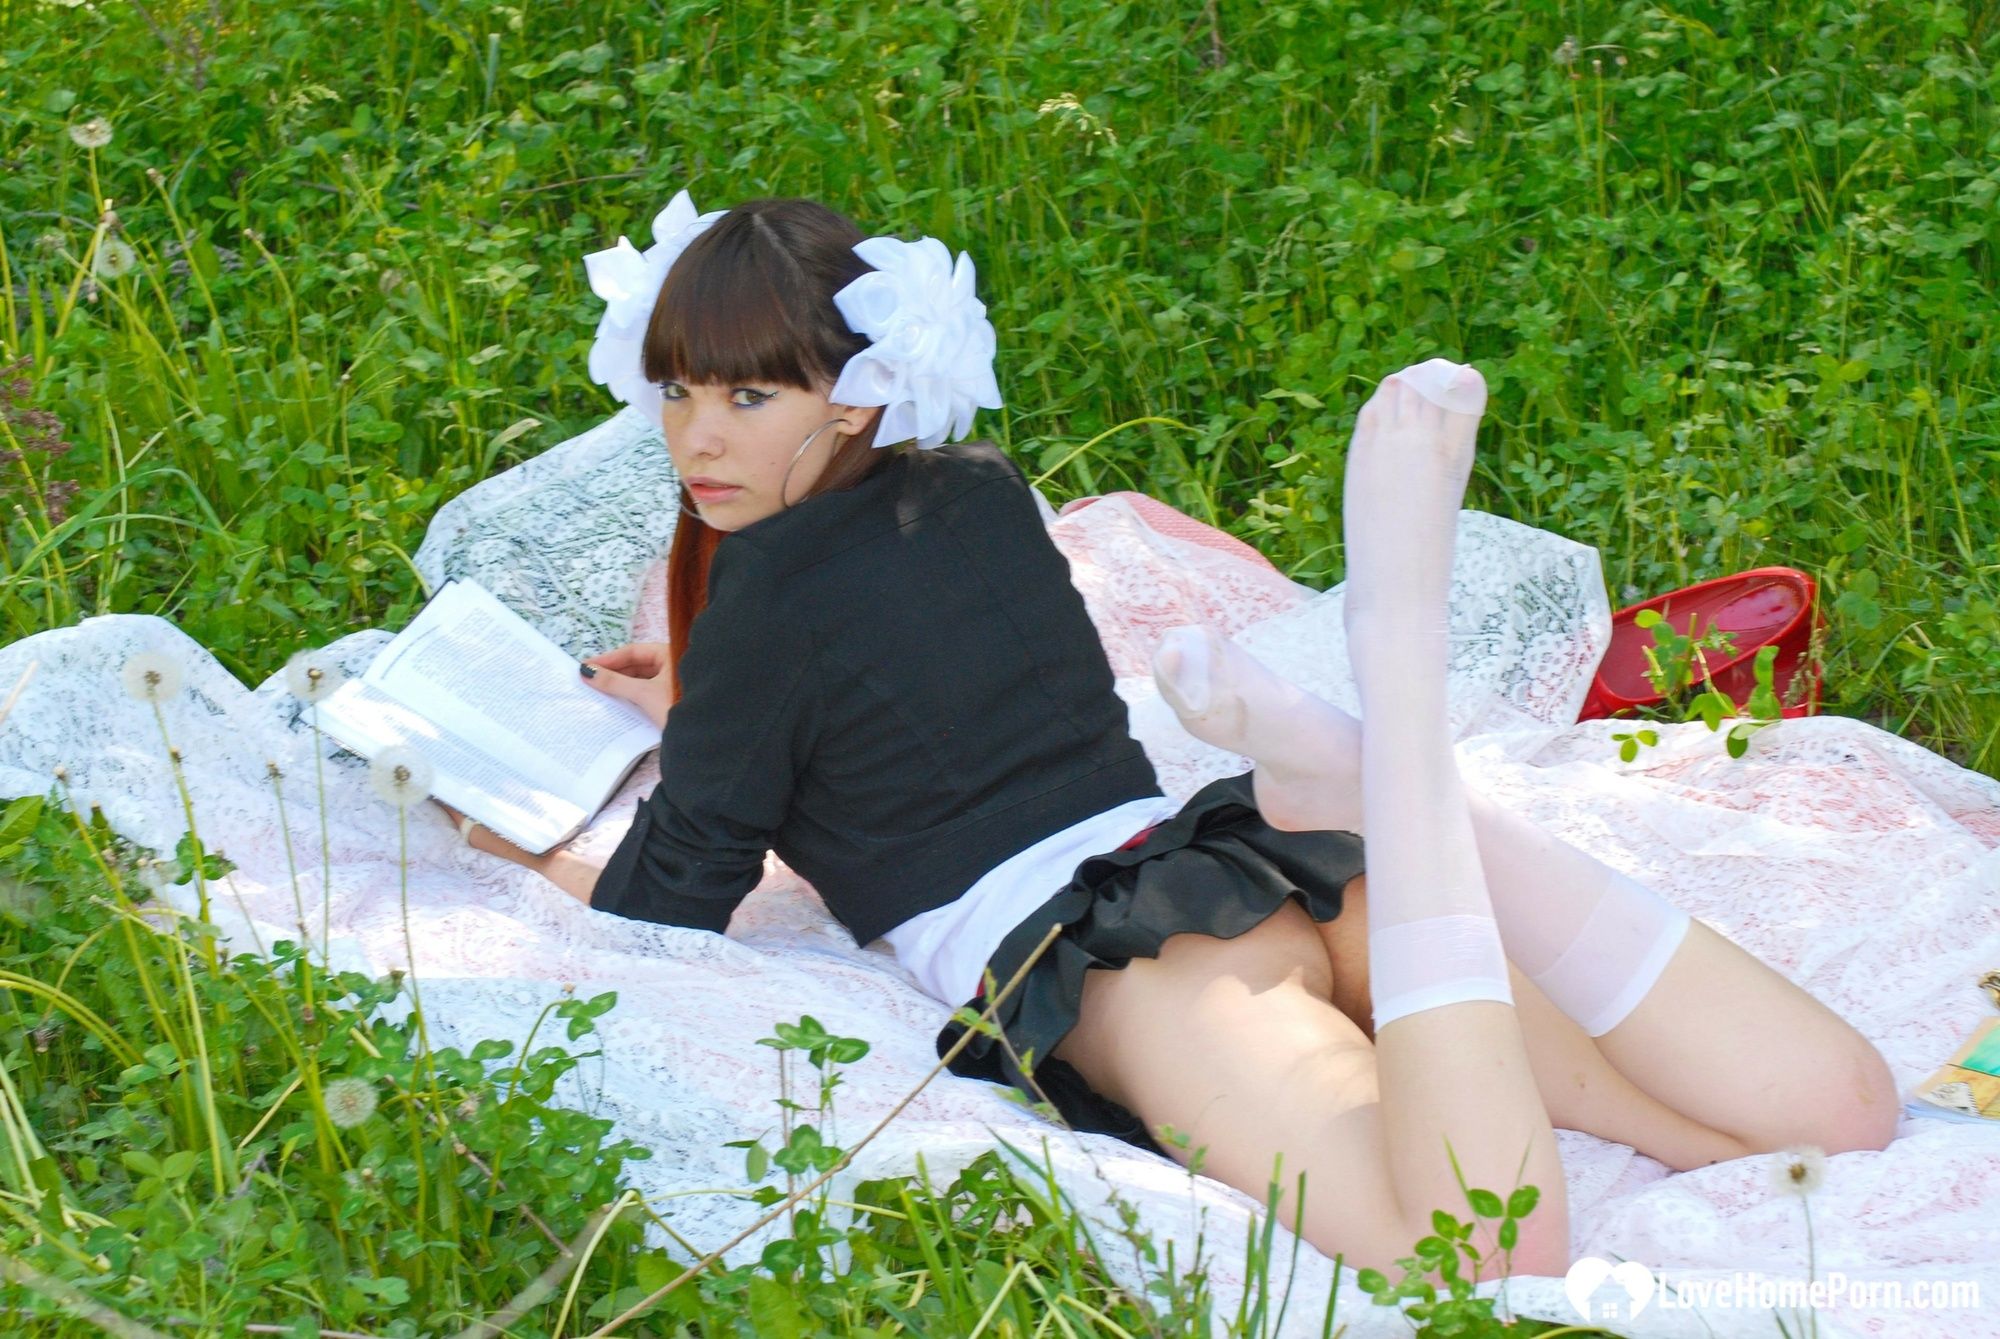 Schoolgirl turns a picnic into a teasing session #2